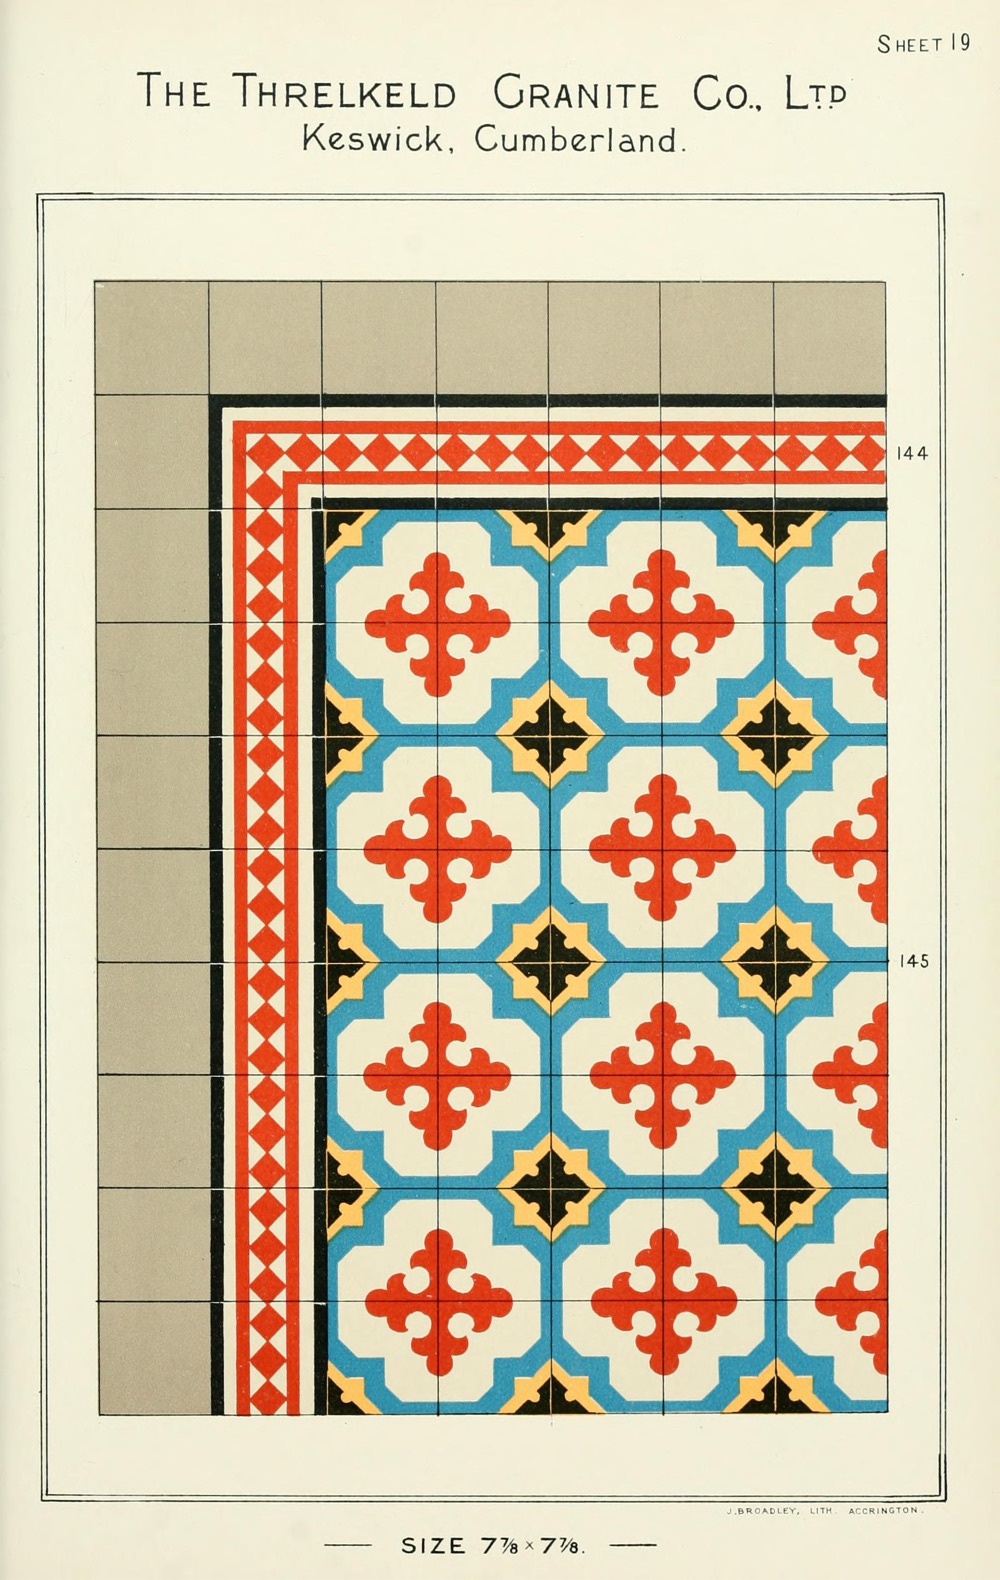 a sample pattern from a book of granite tiles patterns